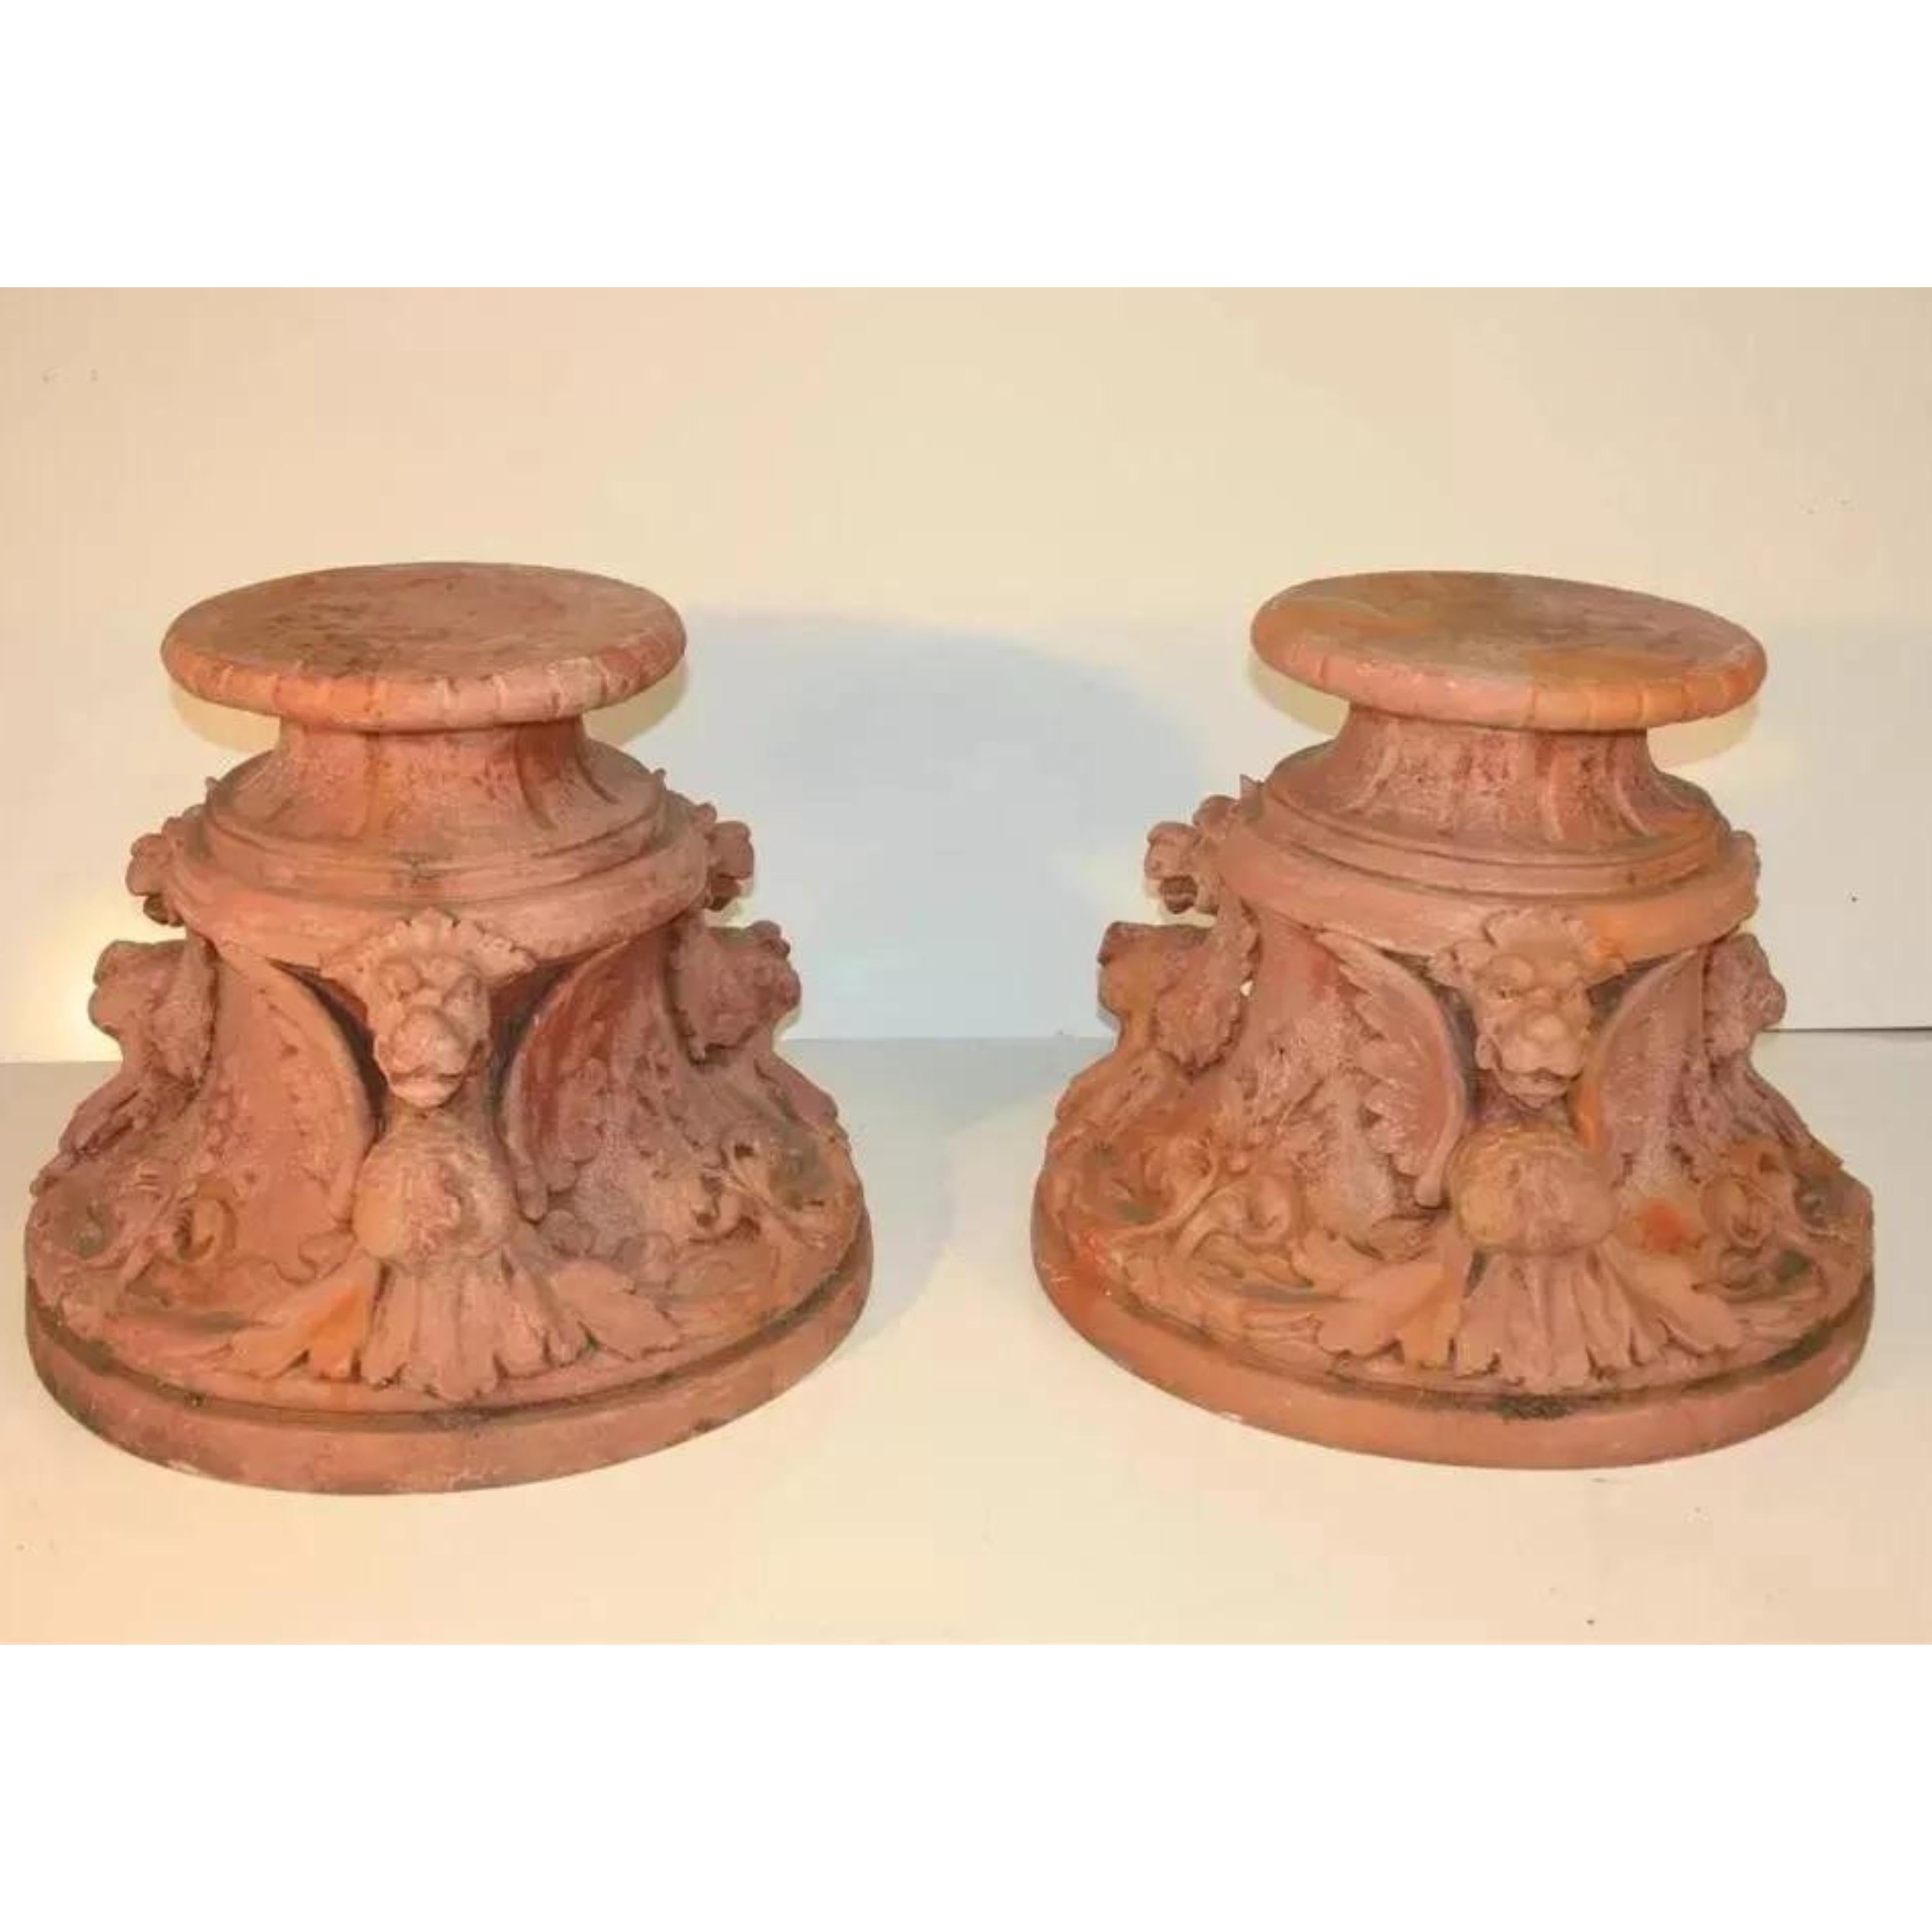 Vintage Italian Renaissance Style Winged Griffin Cast Fiberglass Garden Pedestal Stands Made to Look like Weathered Terracotta - a Pair. Circa Mid 20th Century.
Measurements: 
19